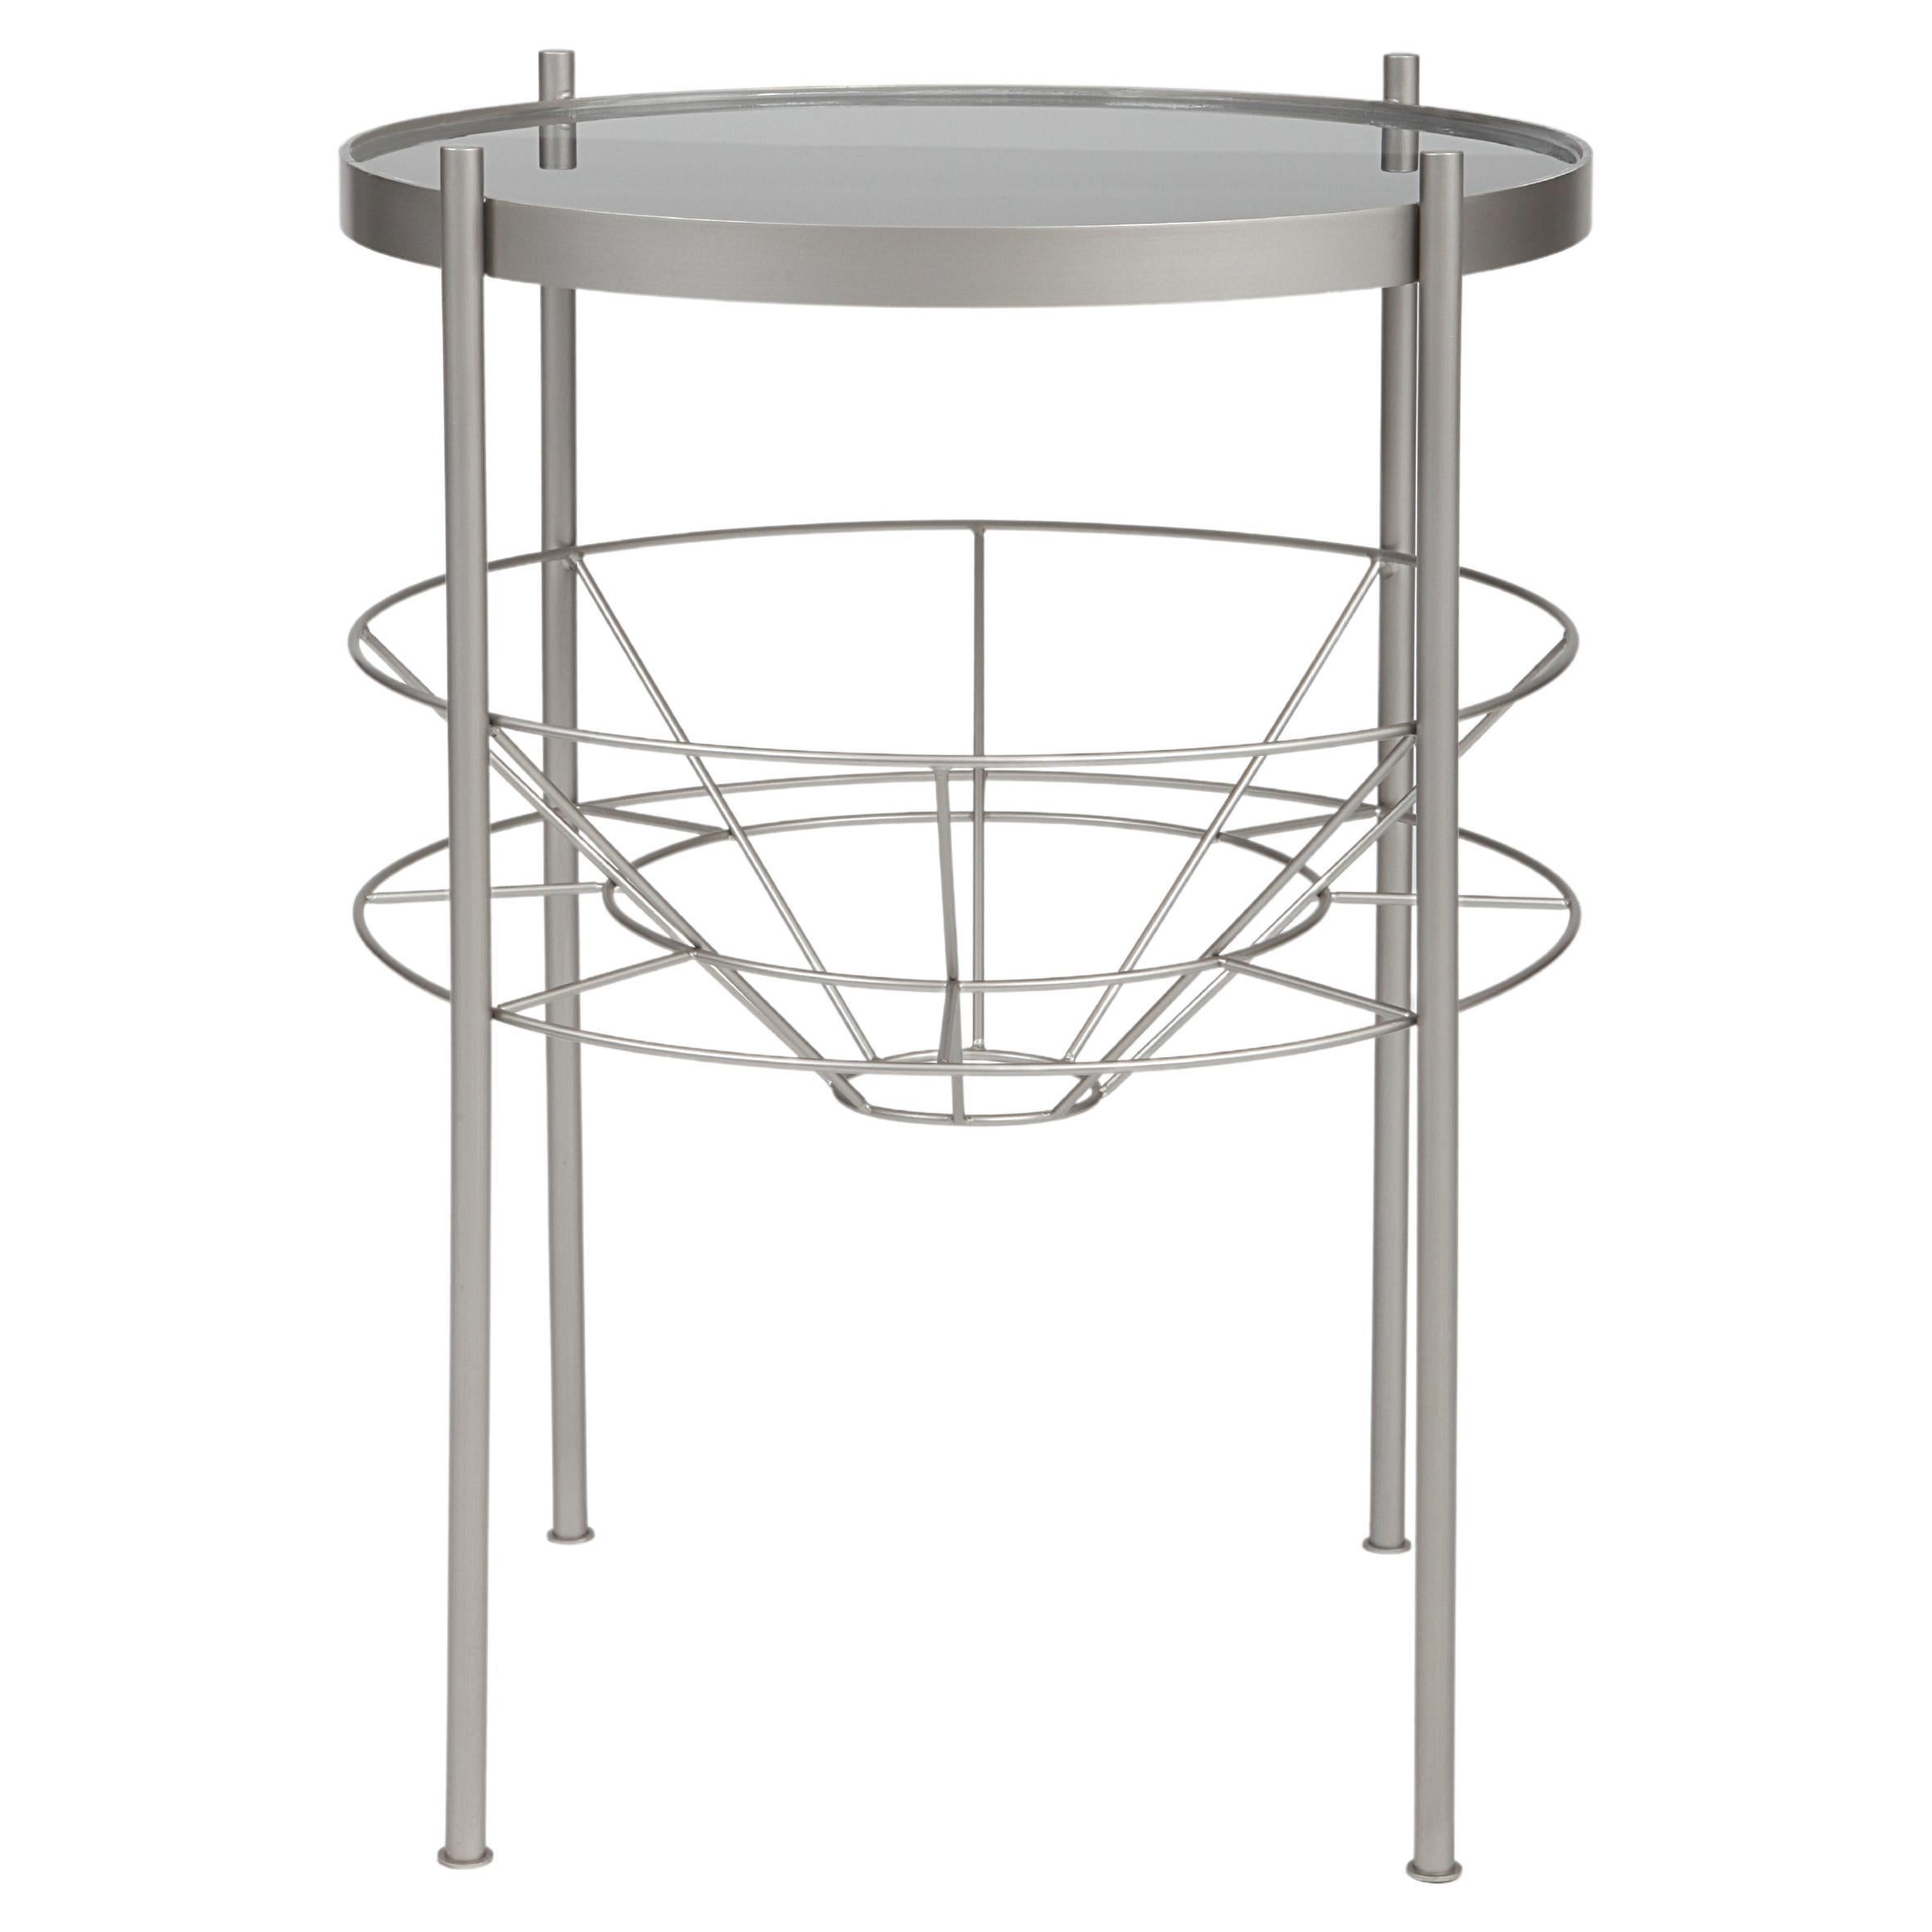 Silos Side Table by Dalmoto